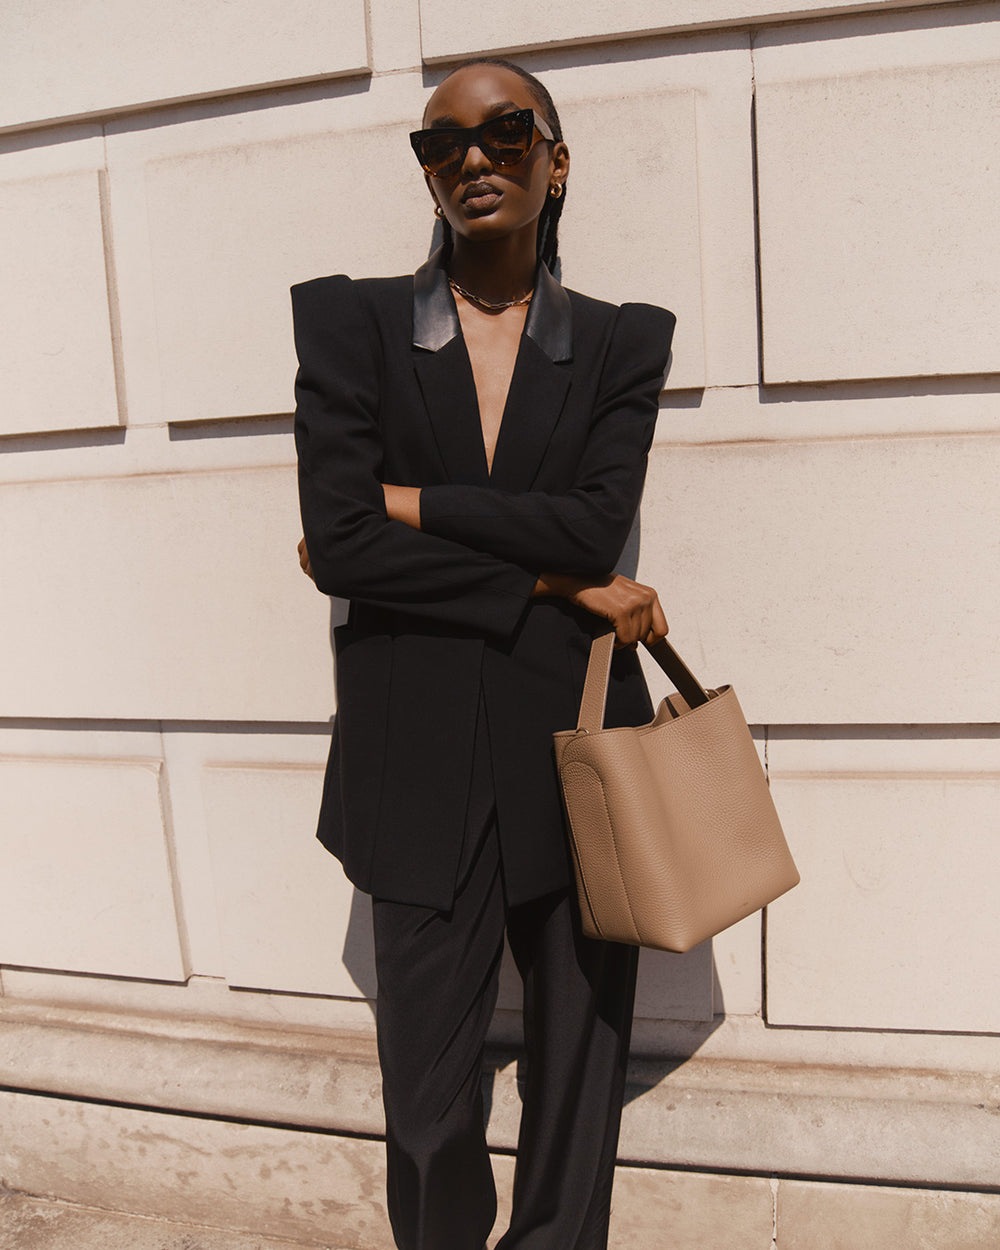 Woman in a suit holding a bag, leaning against a wall with sunglasses on.